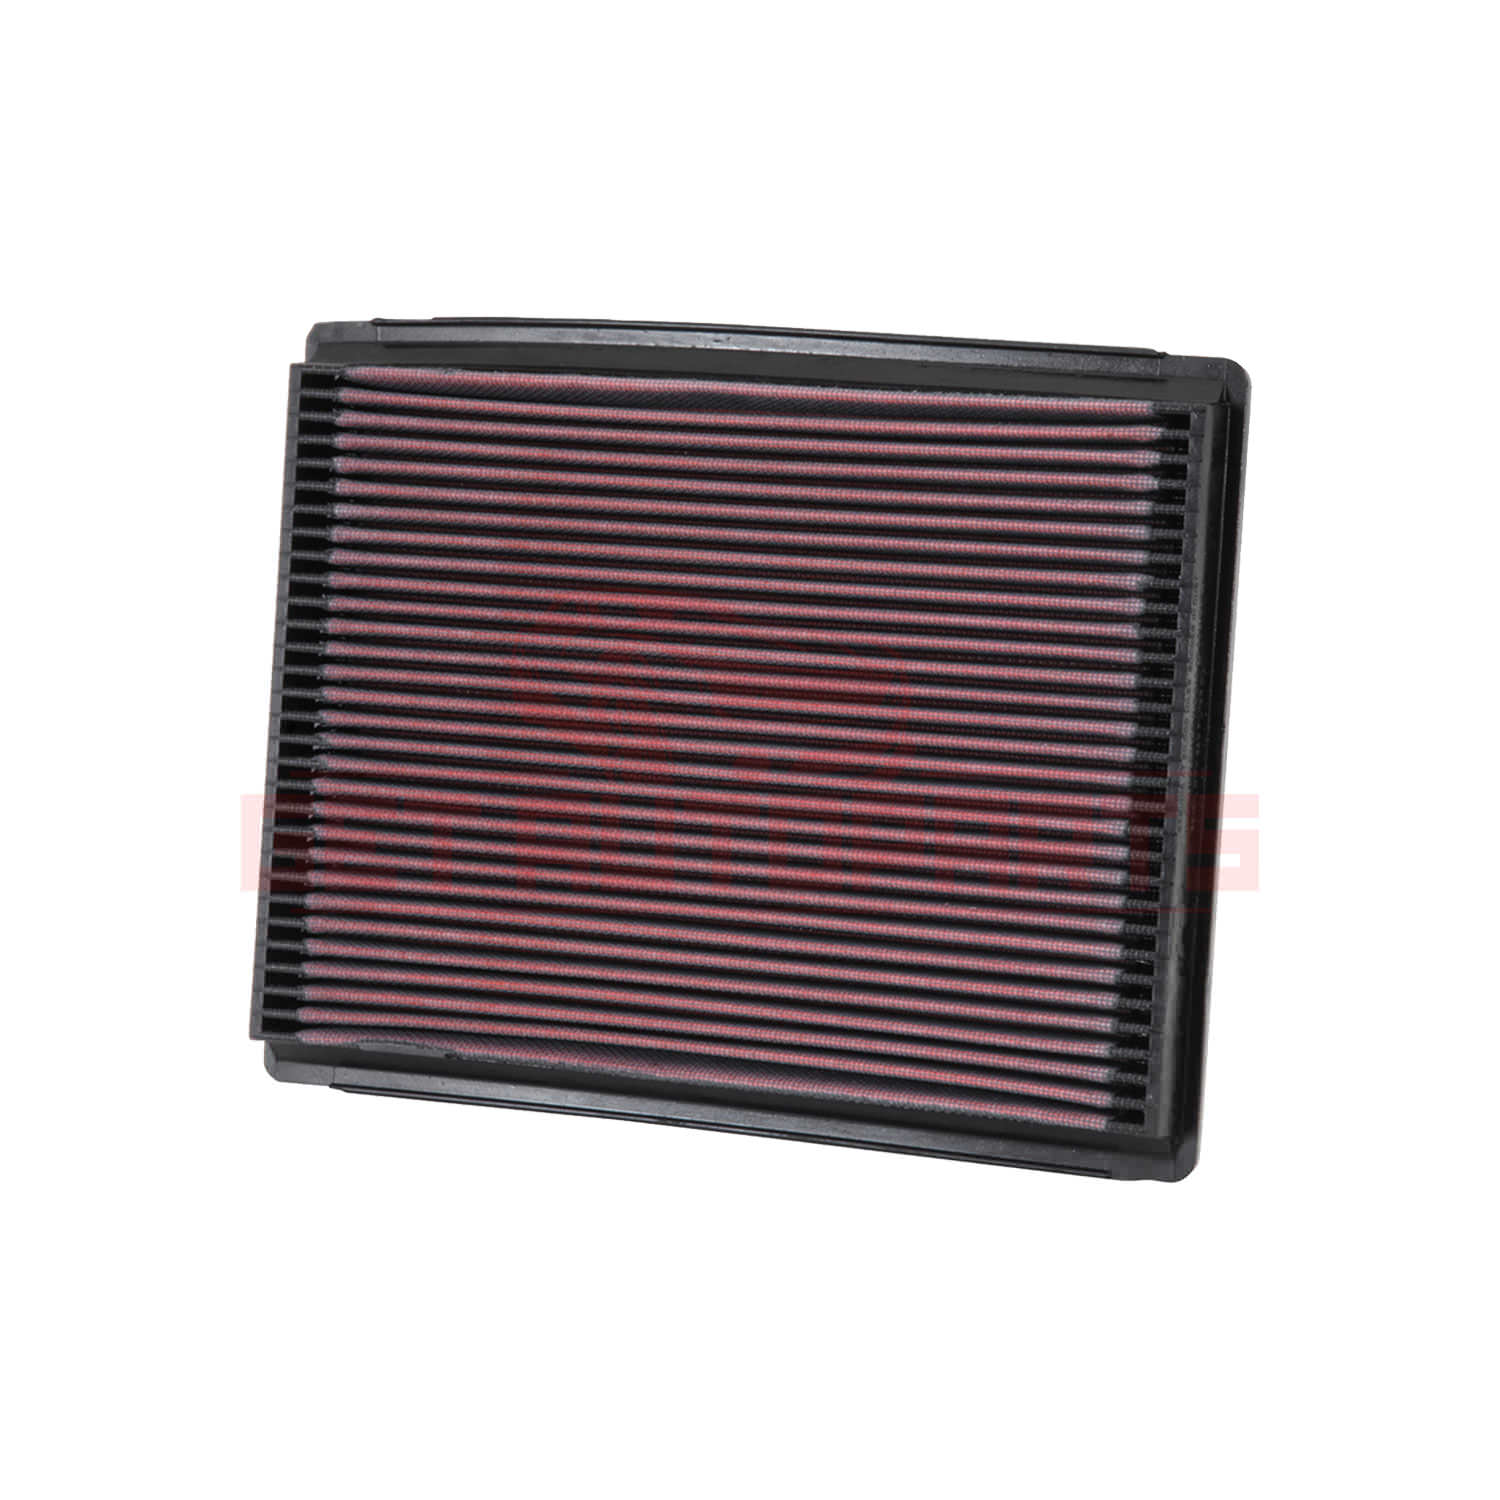 K&N Replacement Air Filter for Ford Mustang 1986-1993